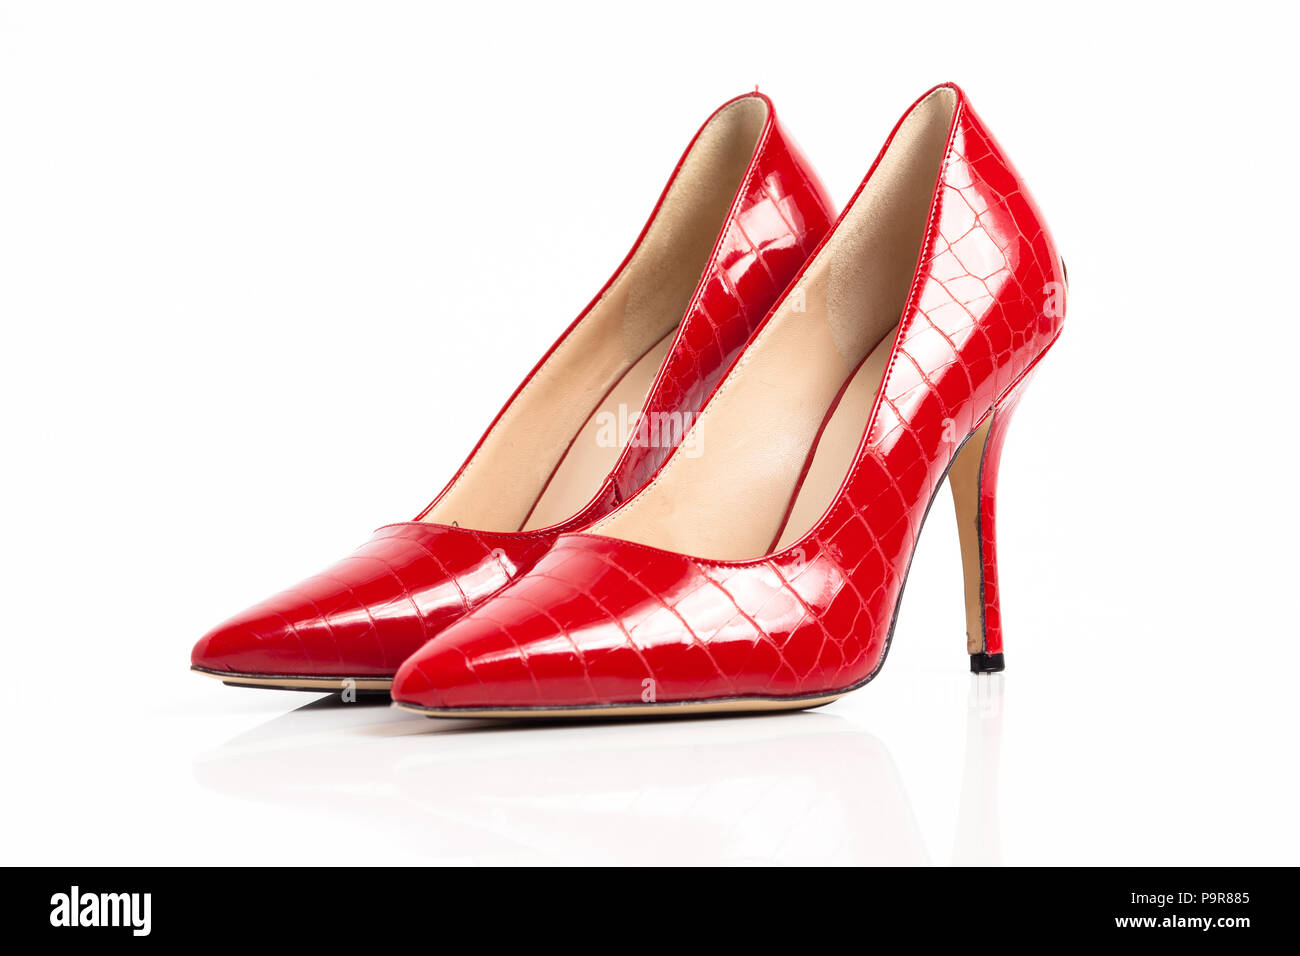 Red high heel shoes isolated on a white background Stock Photo - Alamy